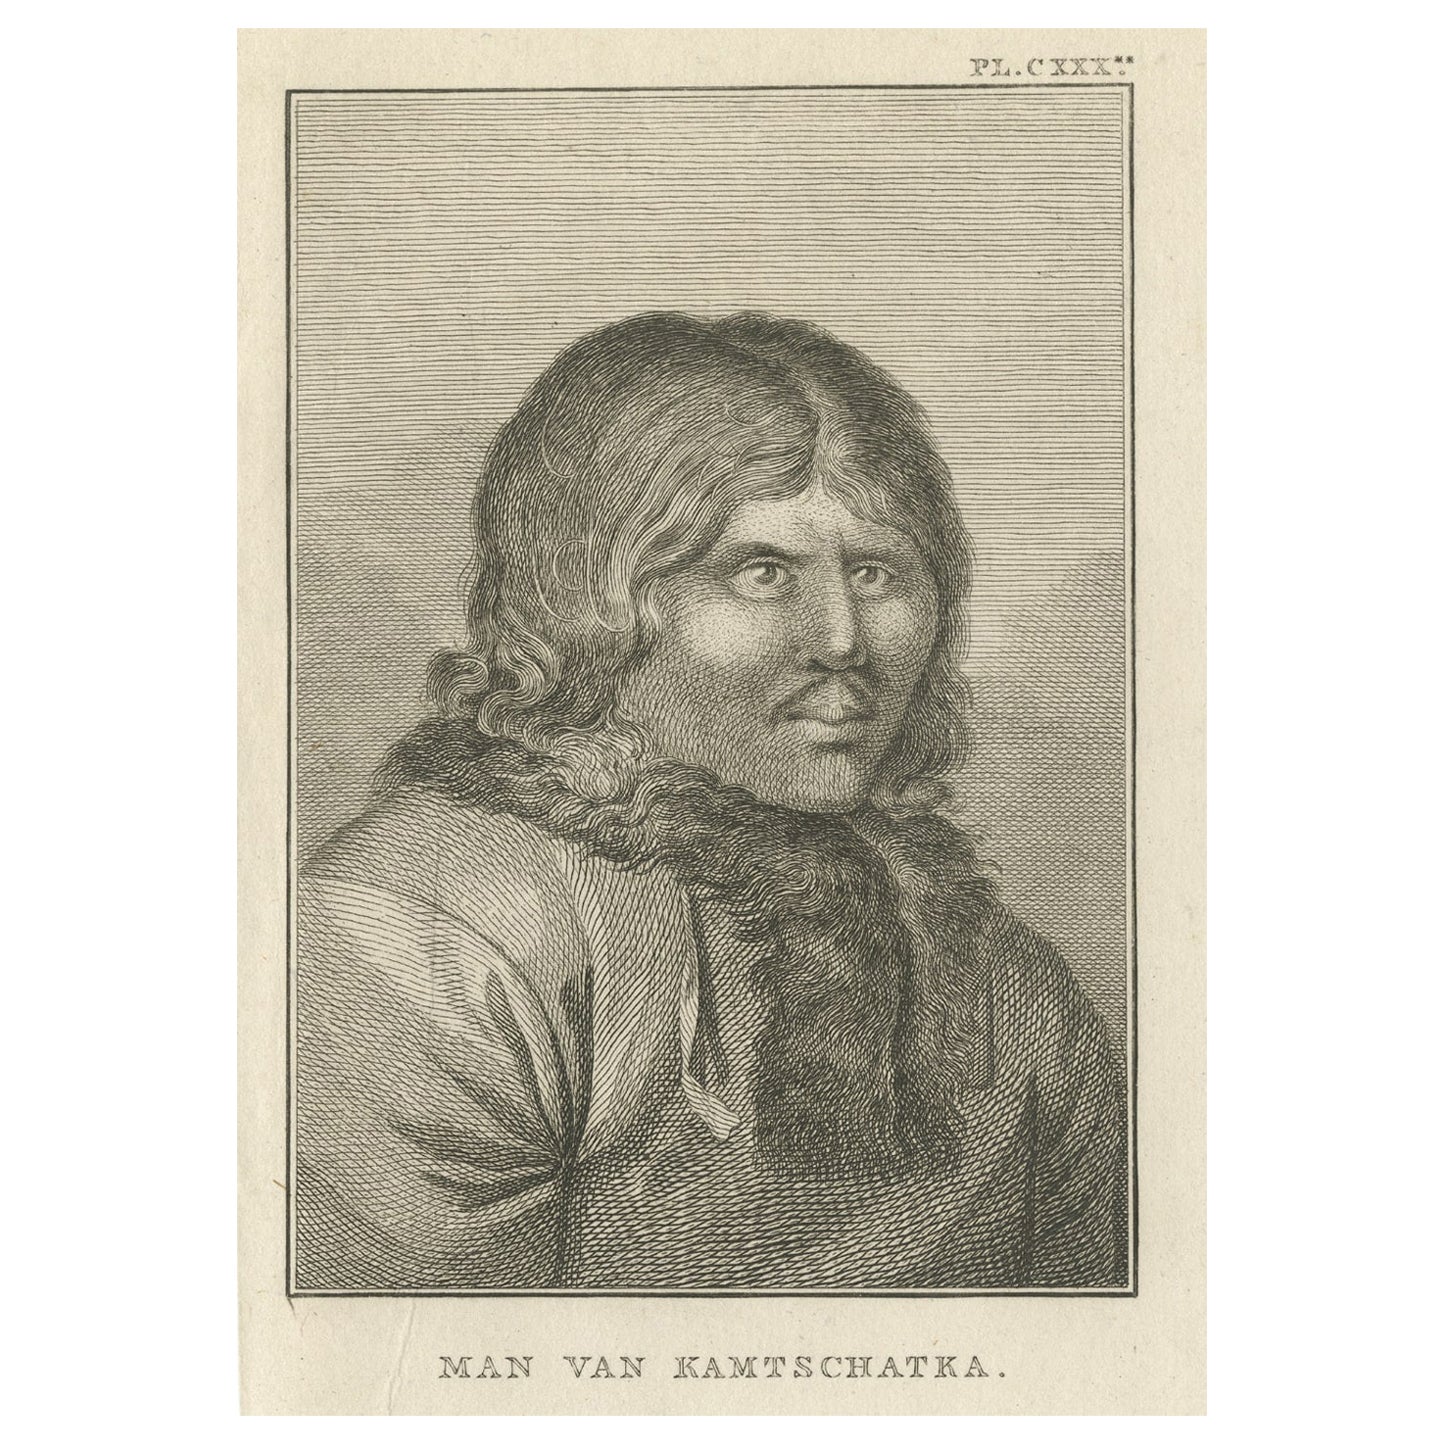 Antique Print of a Man of Kamchatka, Russia, by Cook, 1803